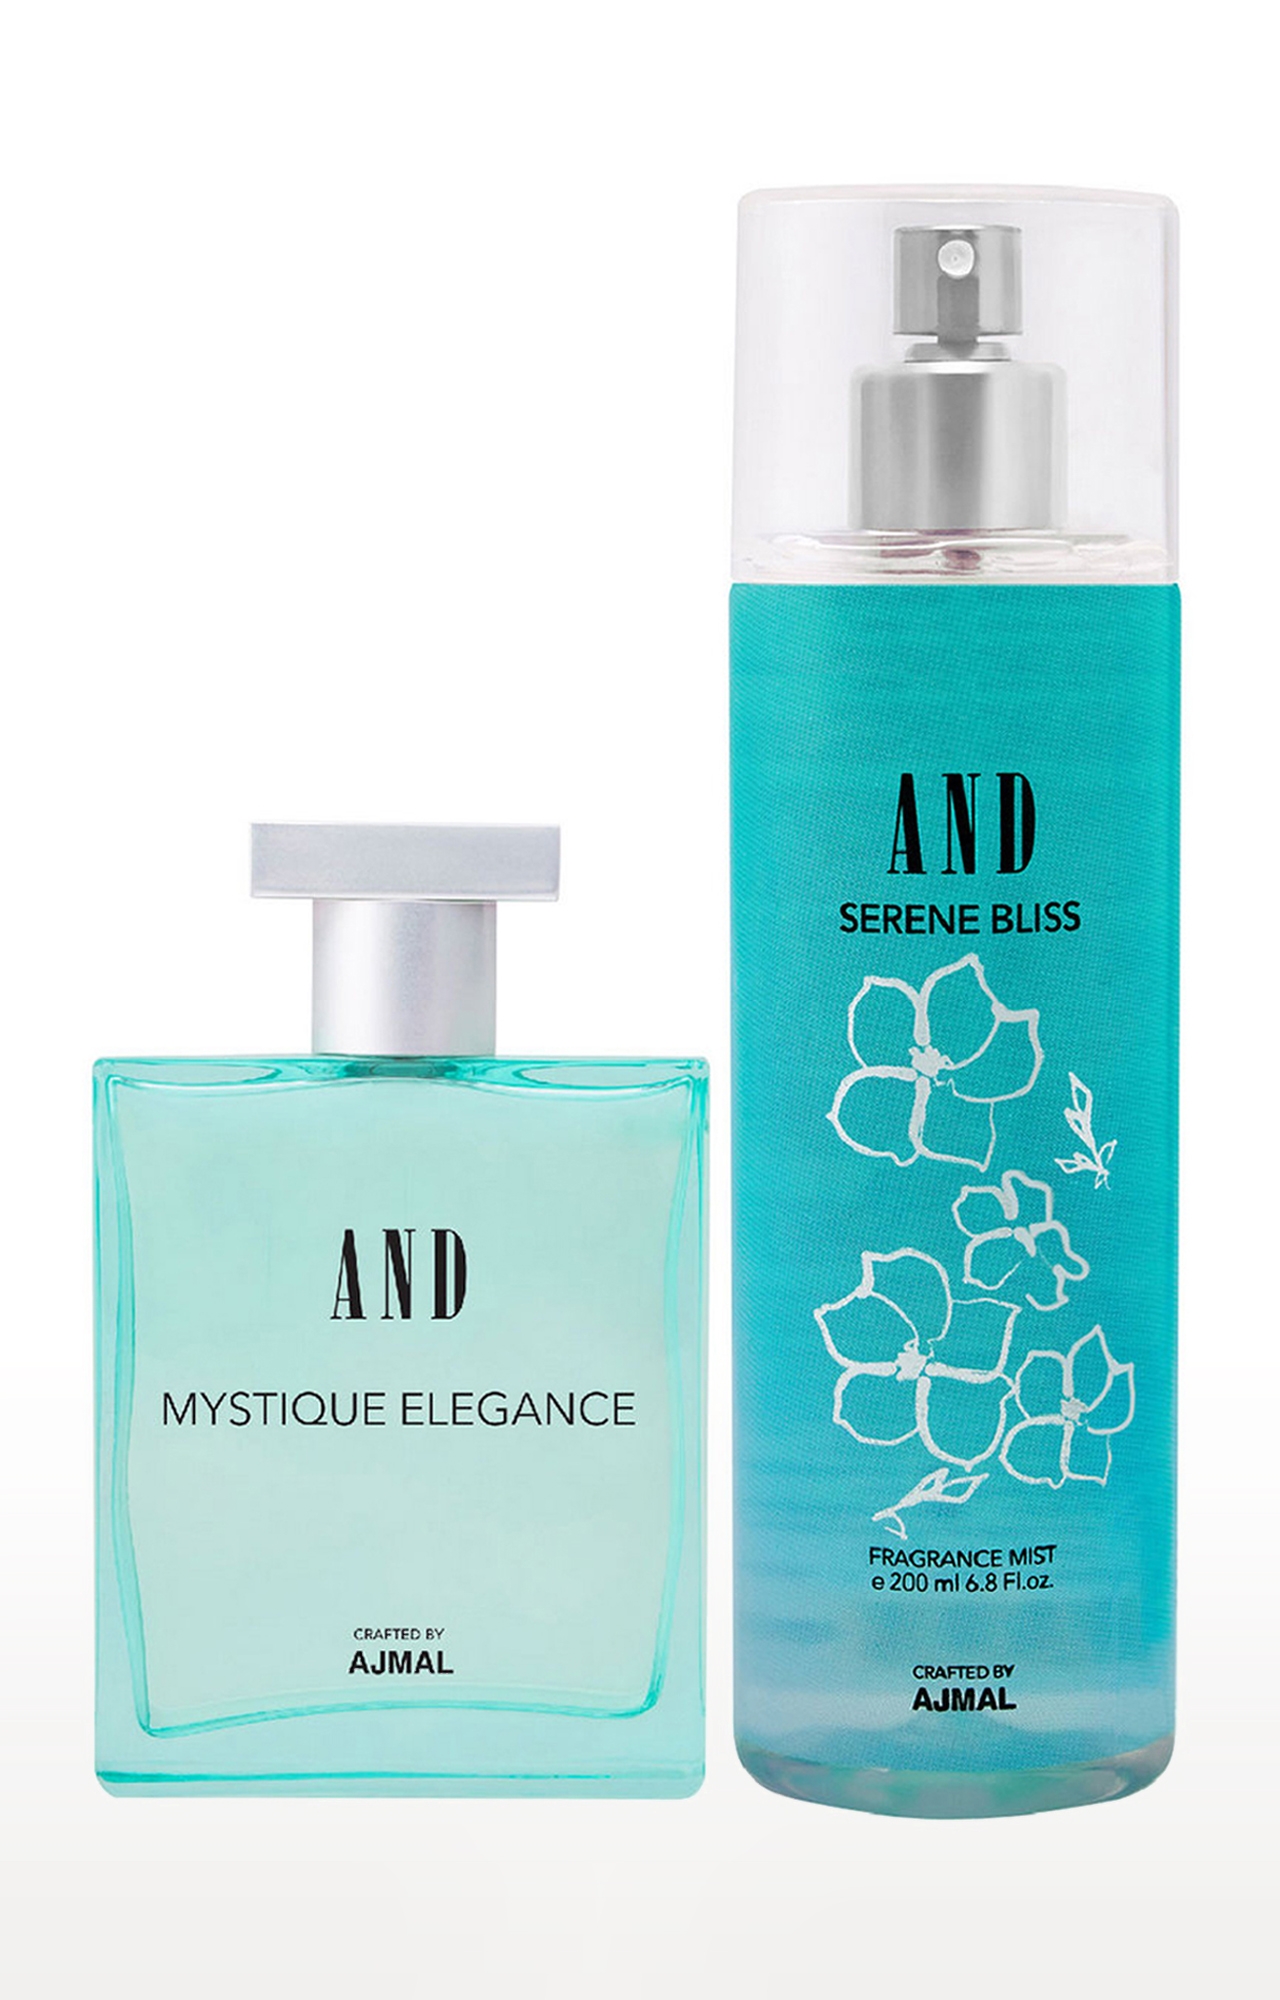 AND Mystique Elegance Eau De Parfum 50ML & Serene Bliss Body Mist 200ML Pack of 2 for Women Crafted by Ajmal 